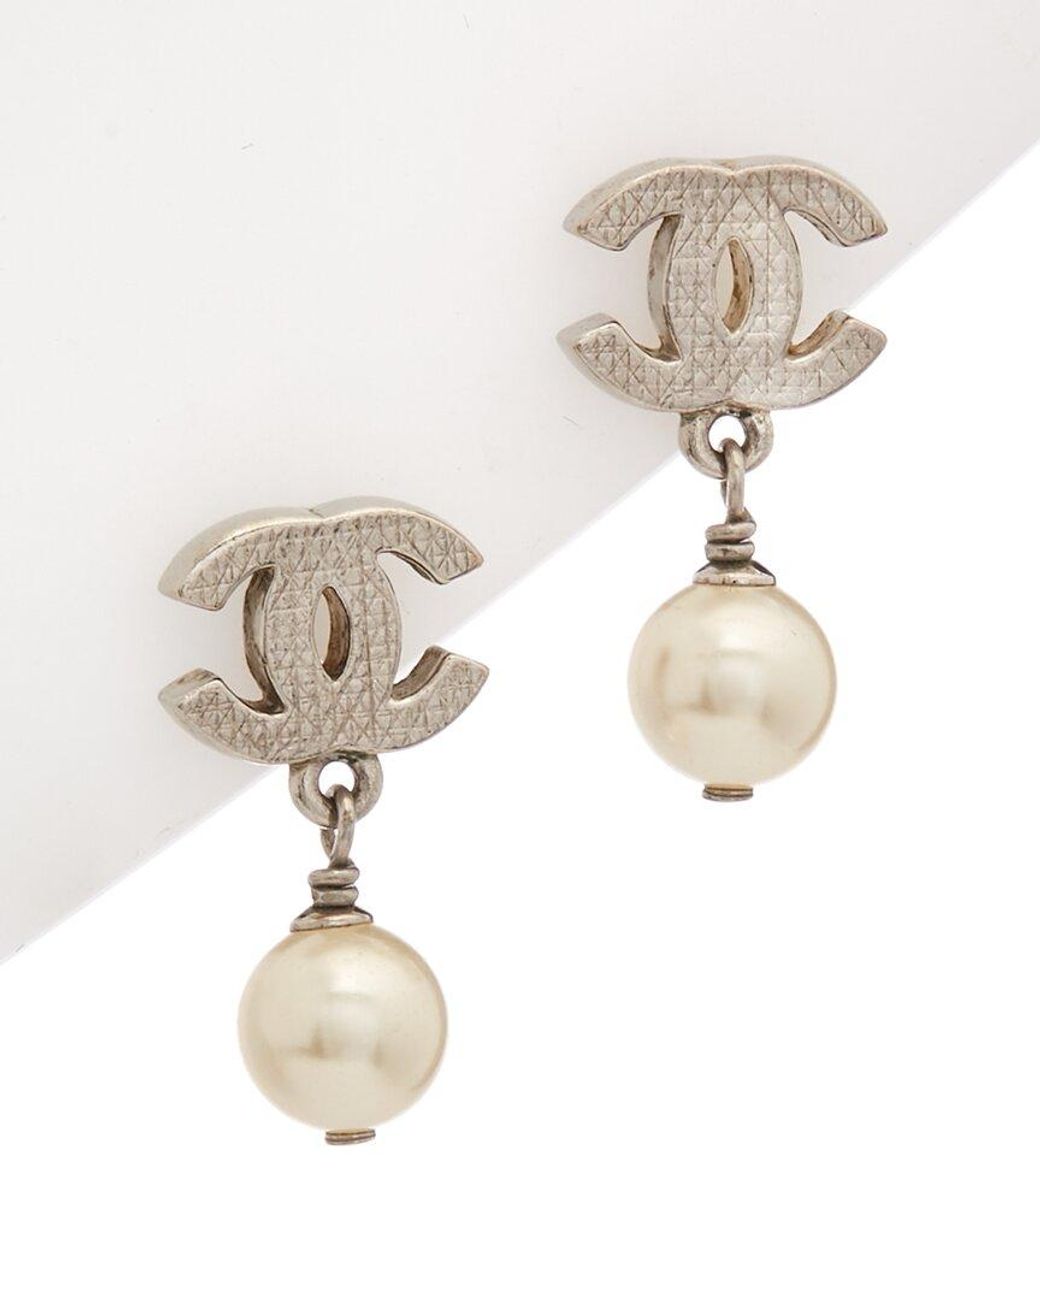 CHANEL, Jewelry, Sold Chanel Gold Pearl Cc Stud Earrings